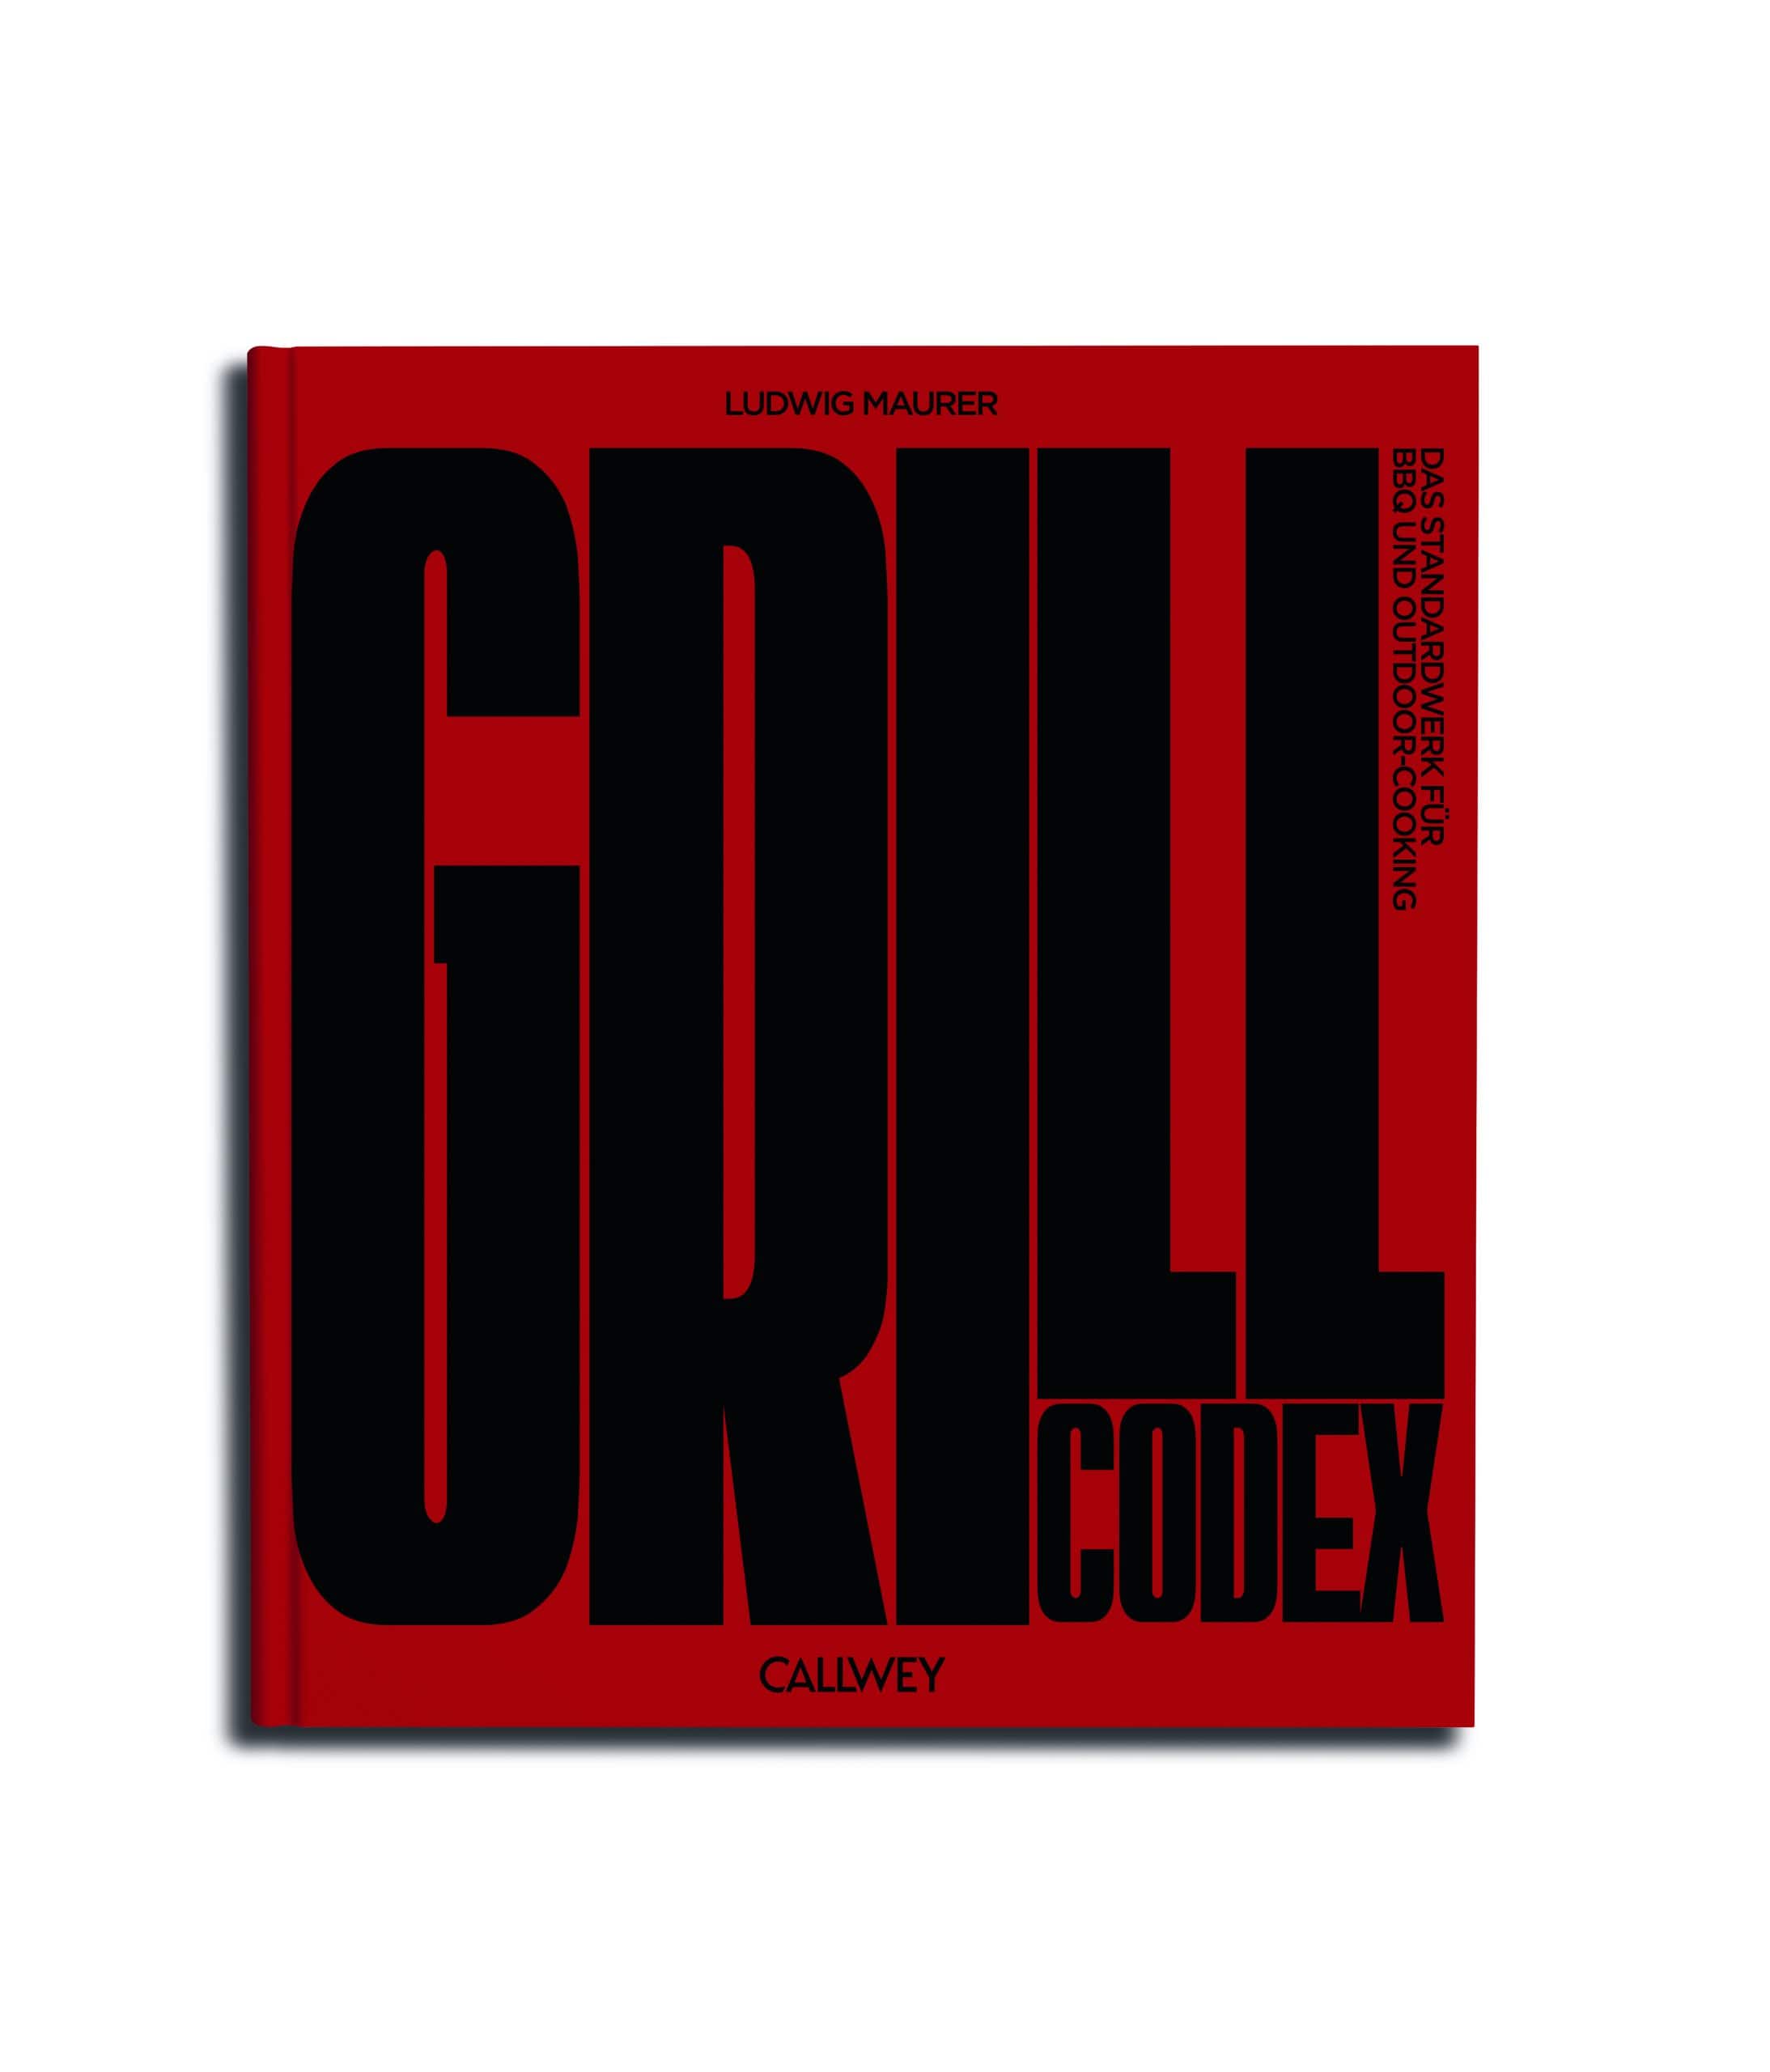 GrillCodex_Maurer_frontal-scaled